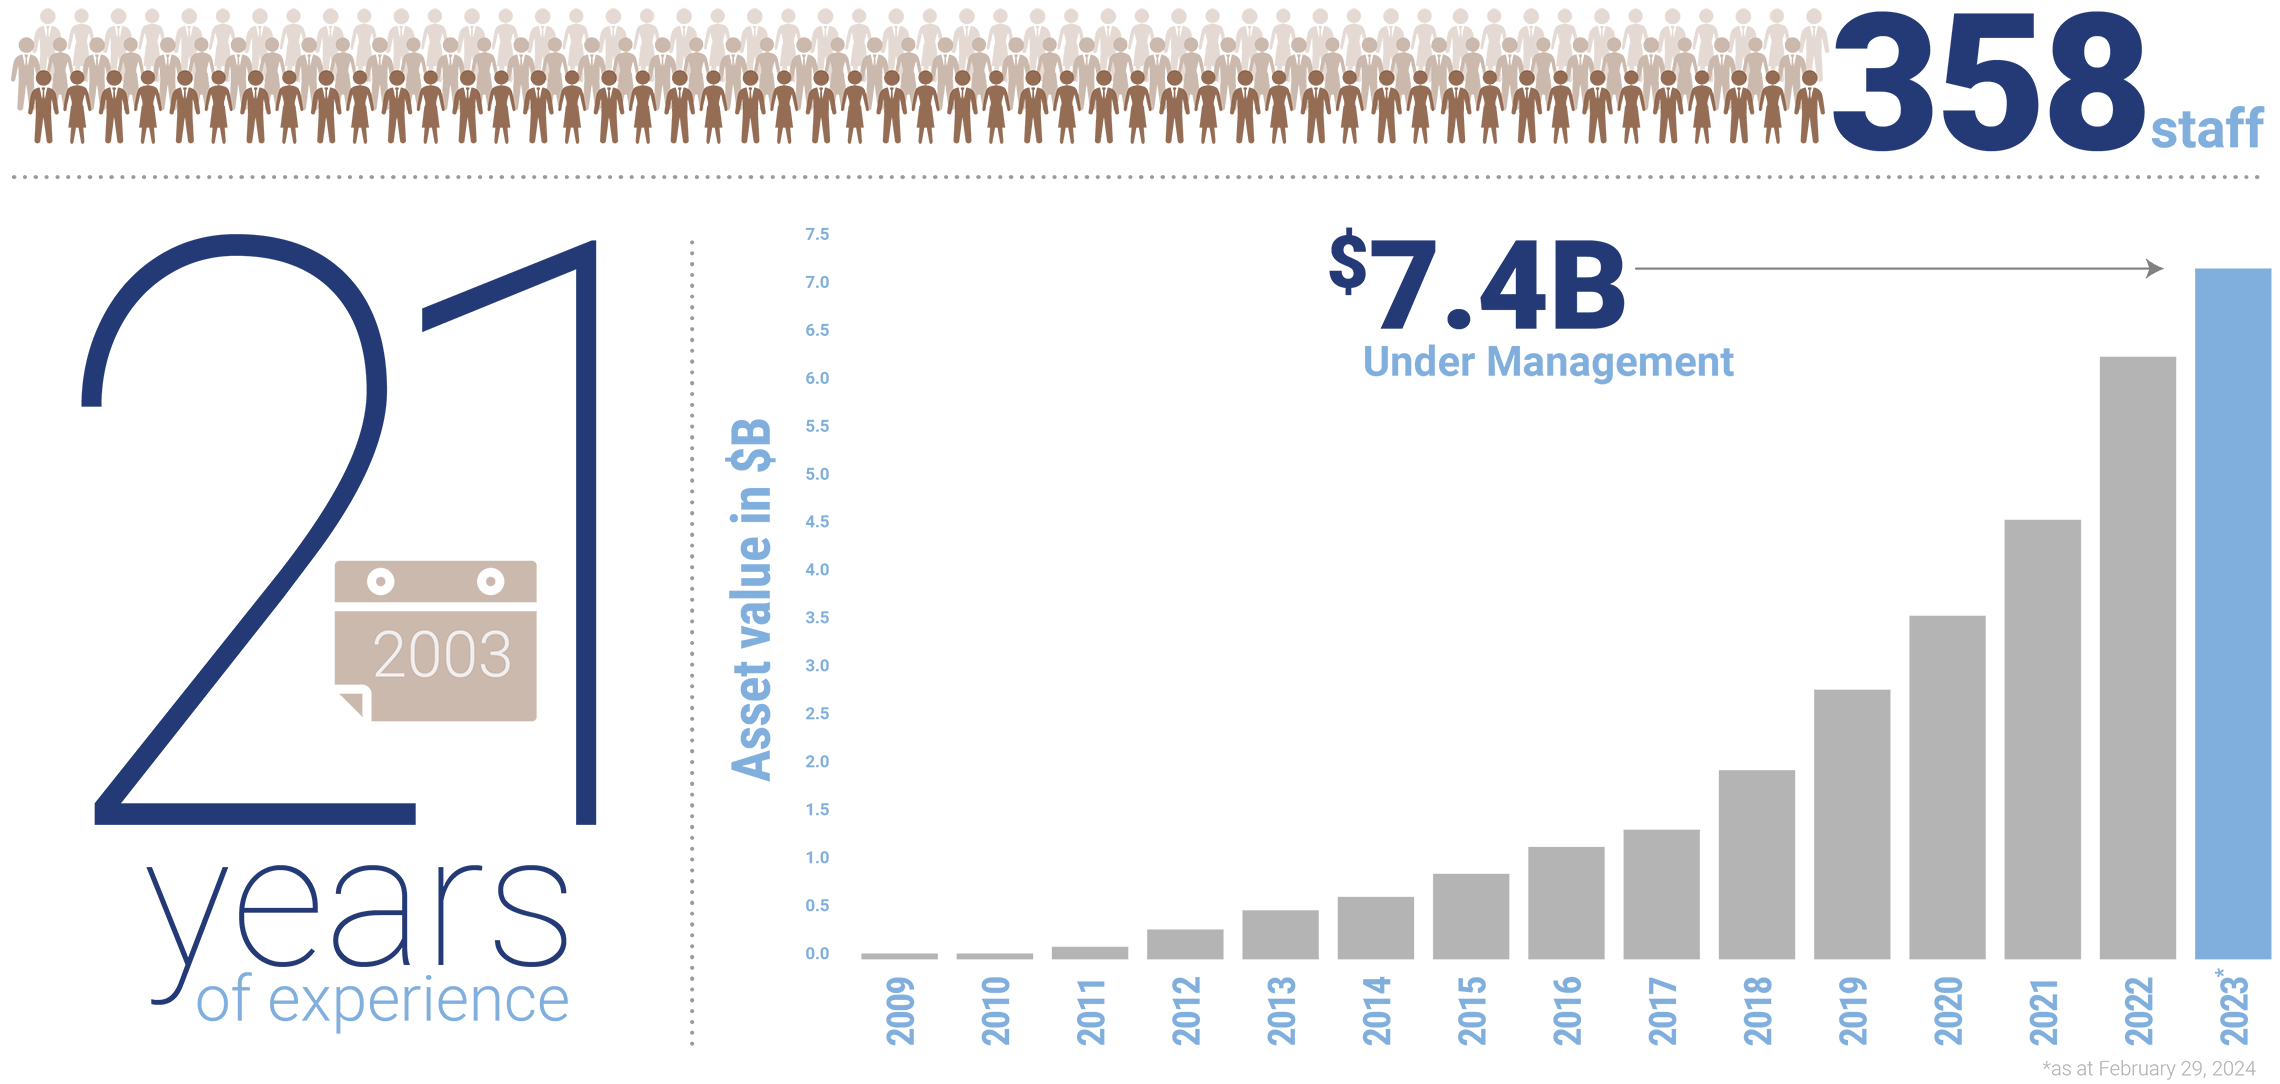 21 years of experience, 358 staff, over $7.4 billion under management as of February 29, 2024